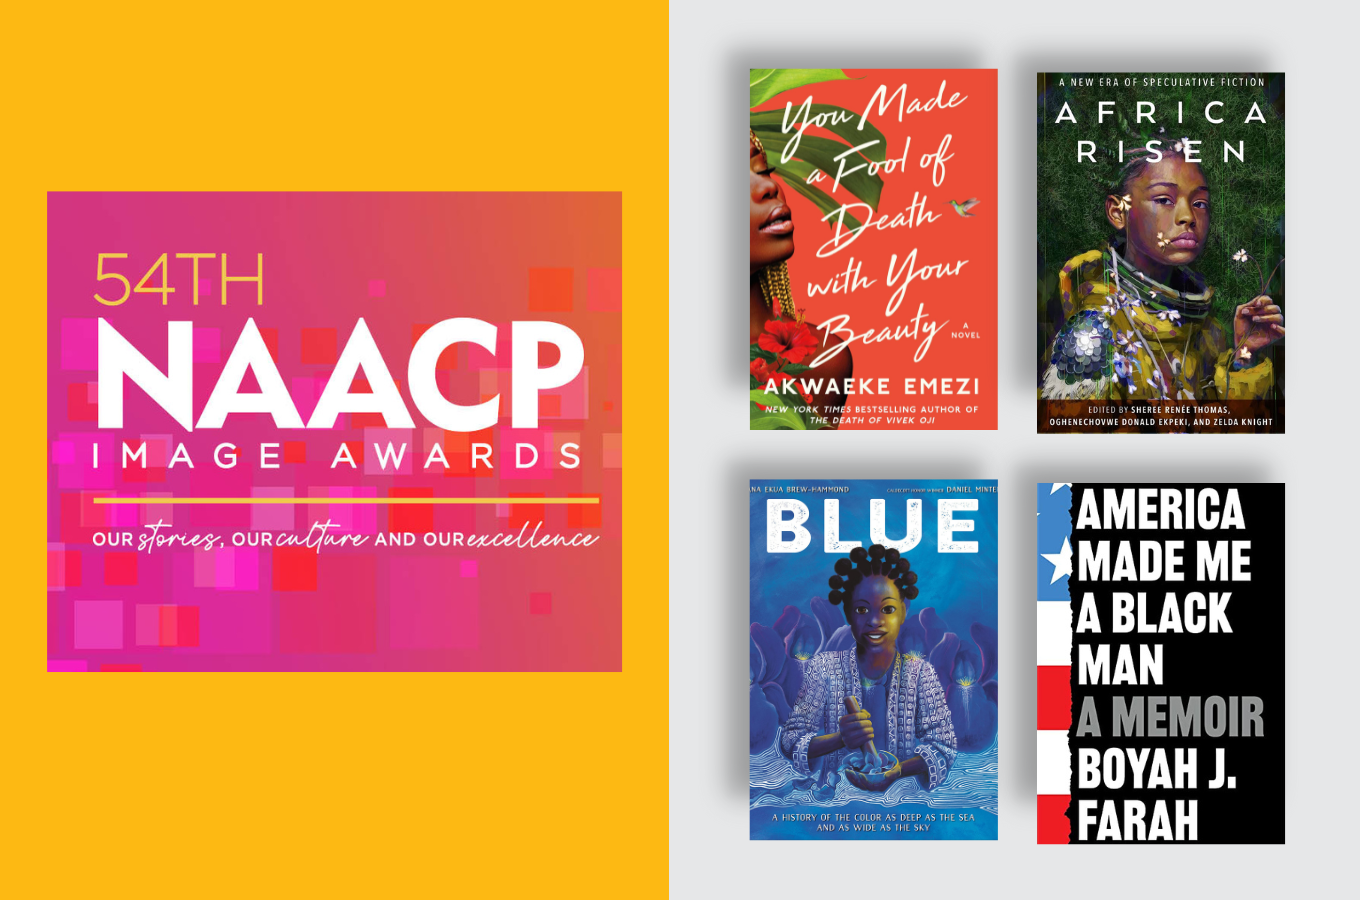 Congrats to the African Nominees of the NAACP Image Awards!